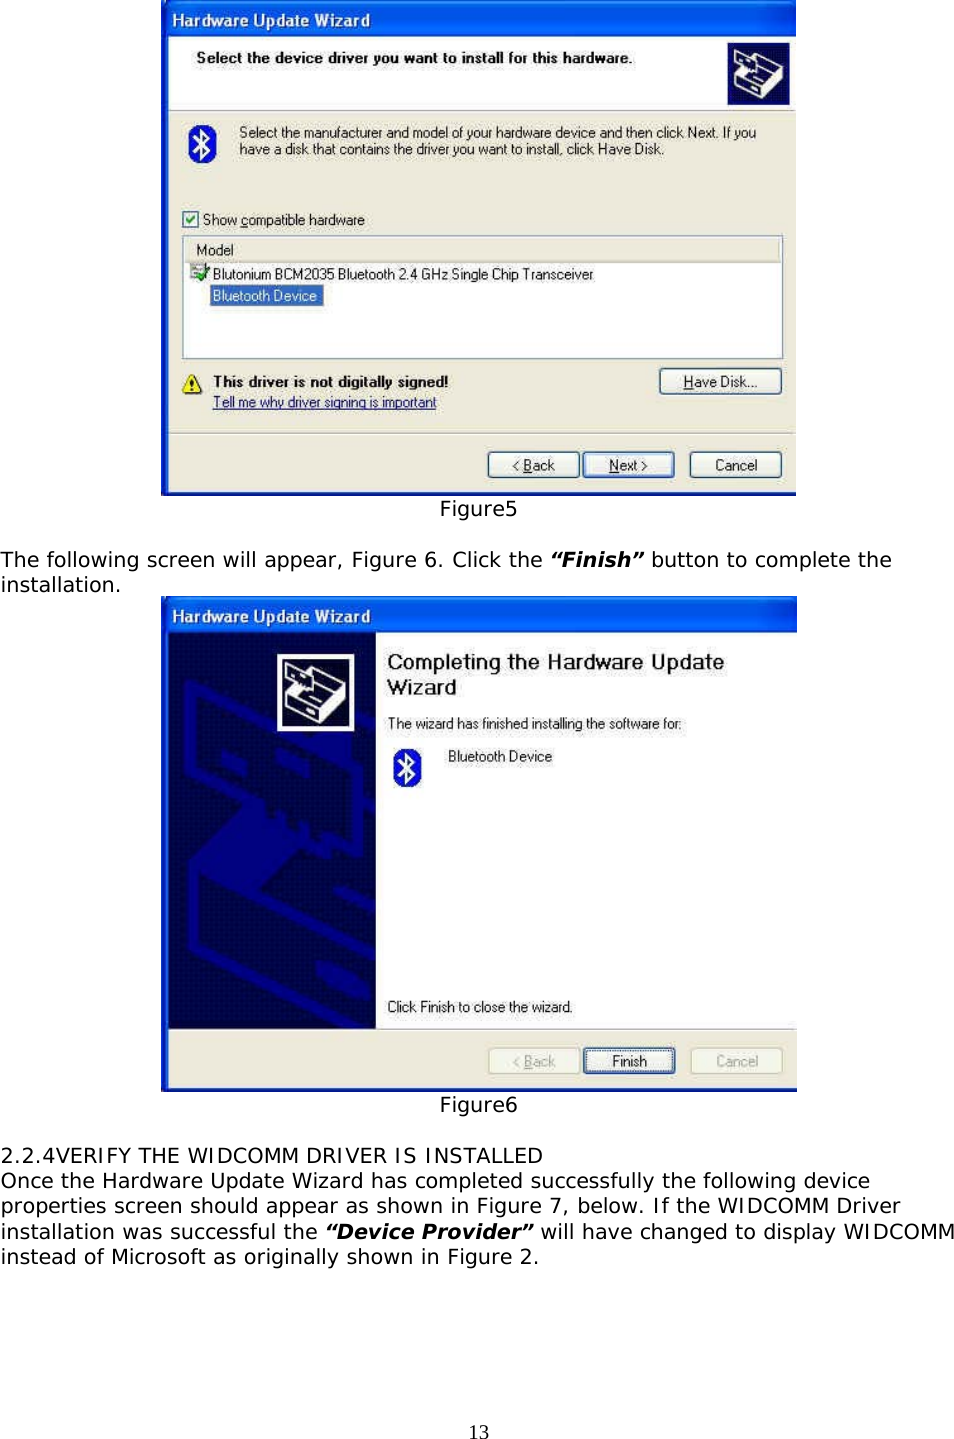 13  Figure5  The following screen will appear, Figure 6. Click the “Finish” button to complete the installation.  Figure6  2.2.4VERIFY THE WIDCOMM DRIVER IS INSTALLED Once the Hardware Update Wizard has completed successfully the following device properties screen should appear as shown in Figure 7, below. If the WIDCOMM Driver installation was successful the “Device Provider” will have changed to display WIDCOMM instead of Microsoft as originally shown in Figure 2. 